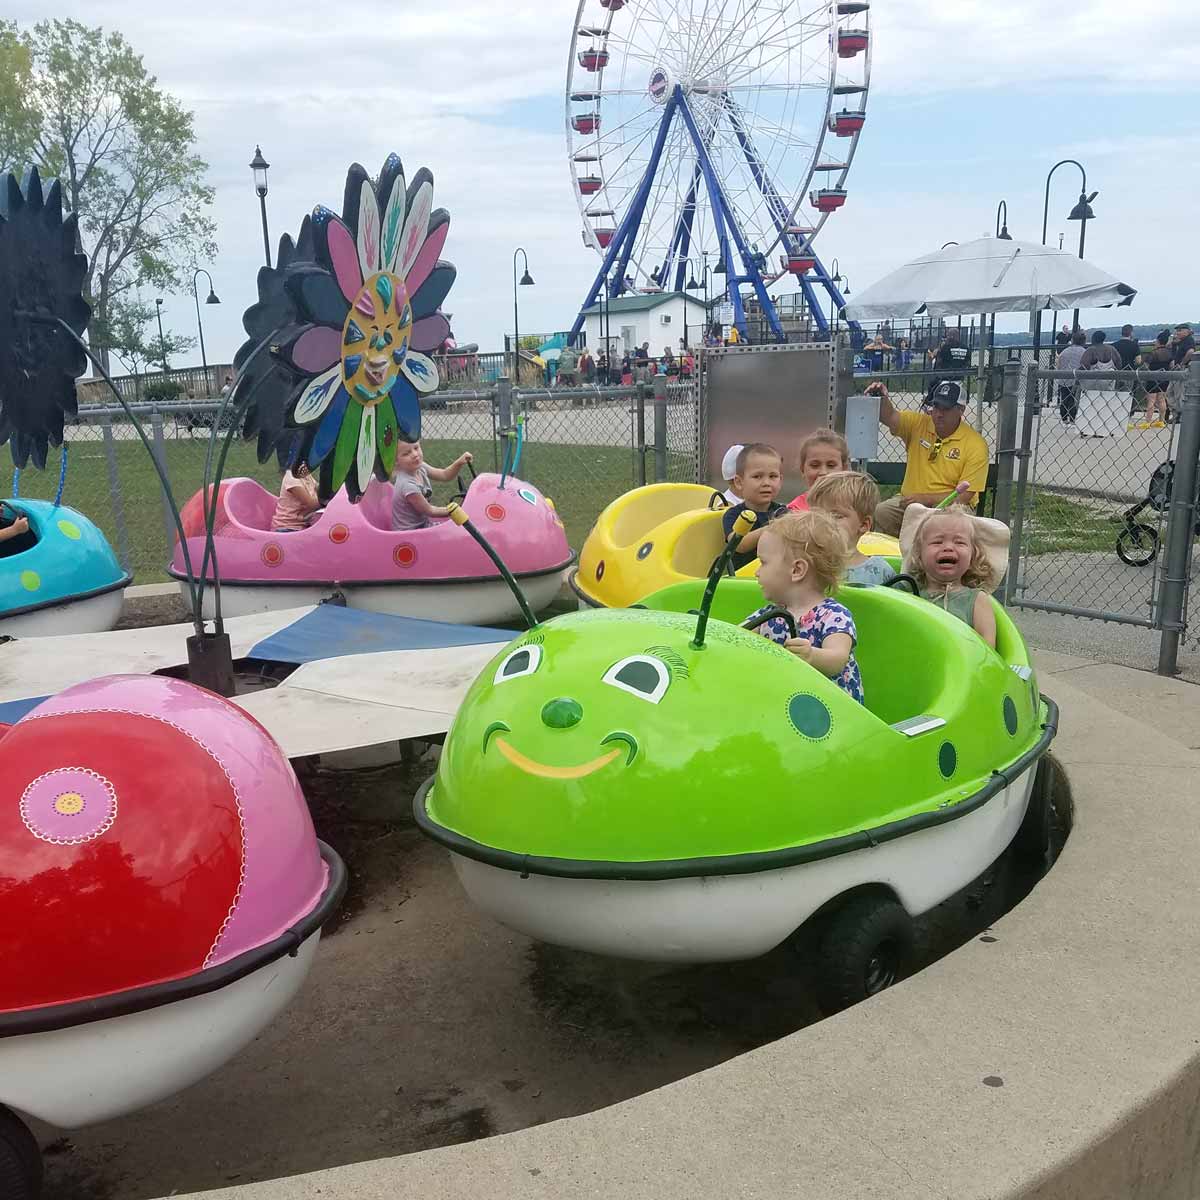 Lady Bugs Ride at Bay Beach in Green Bay